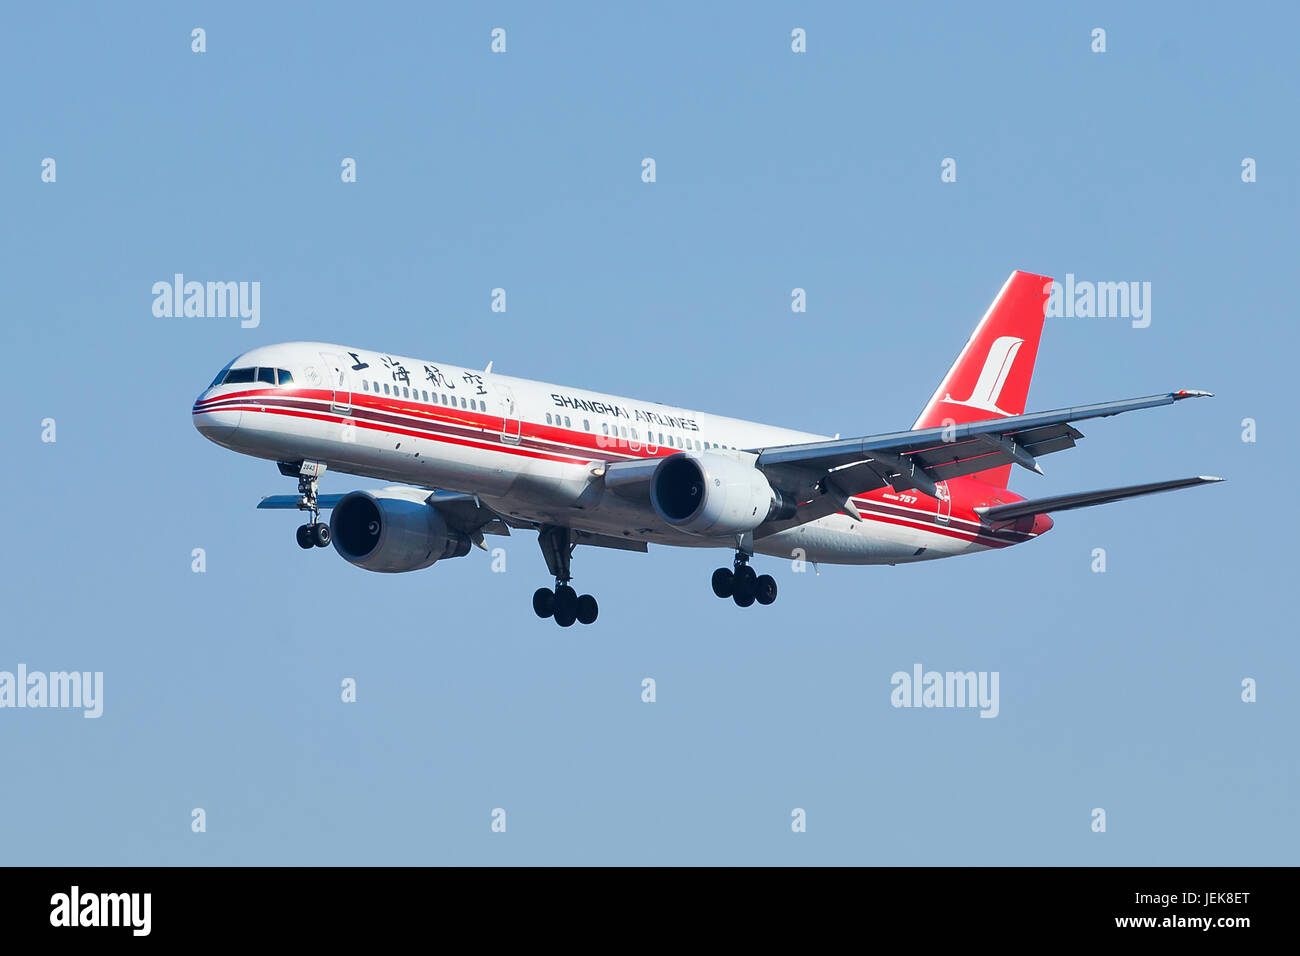 BEIJING–MARCH 6, 2014. Shanghai Airlines Boeing 757, B-2843. Boeiing’s largest single-aisle passenger aircraft, produced from 1981 to 2004. Stock Photo